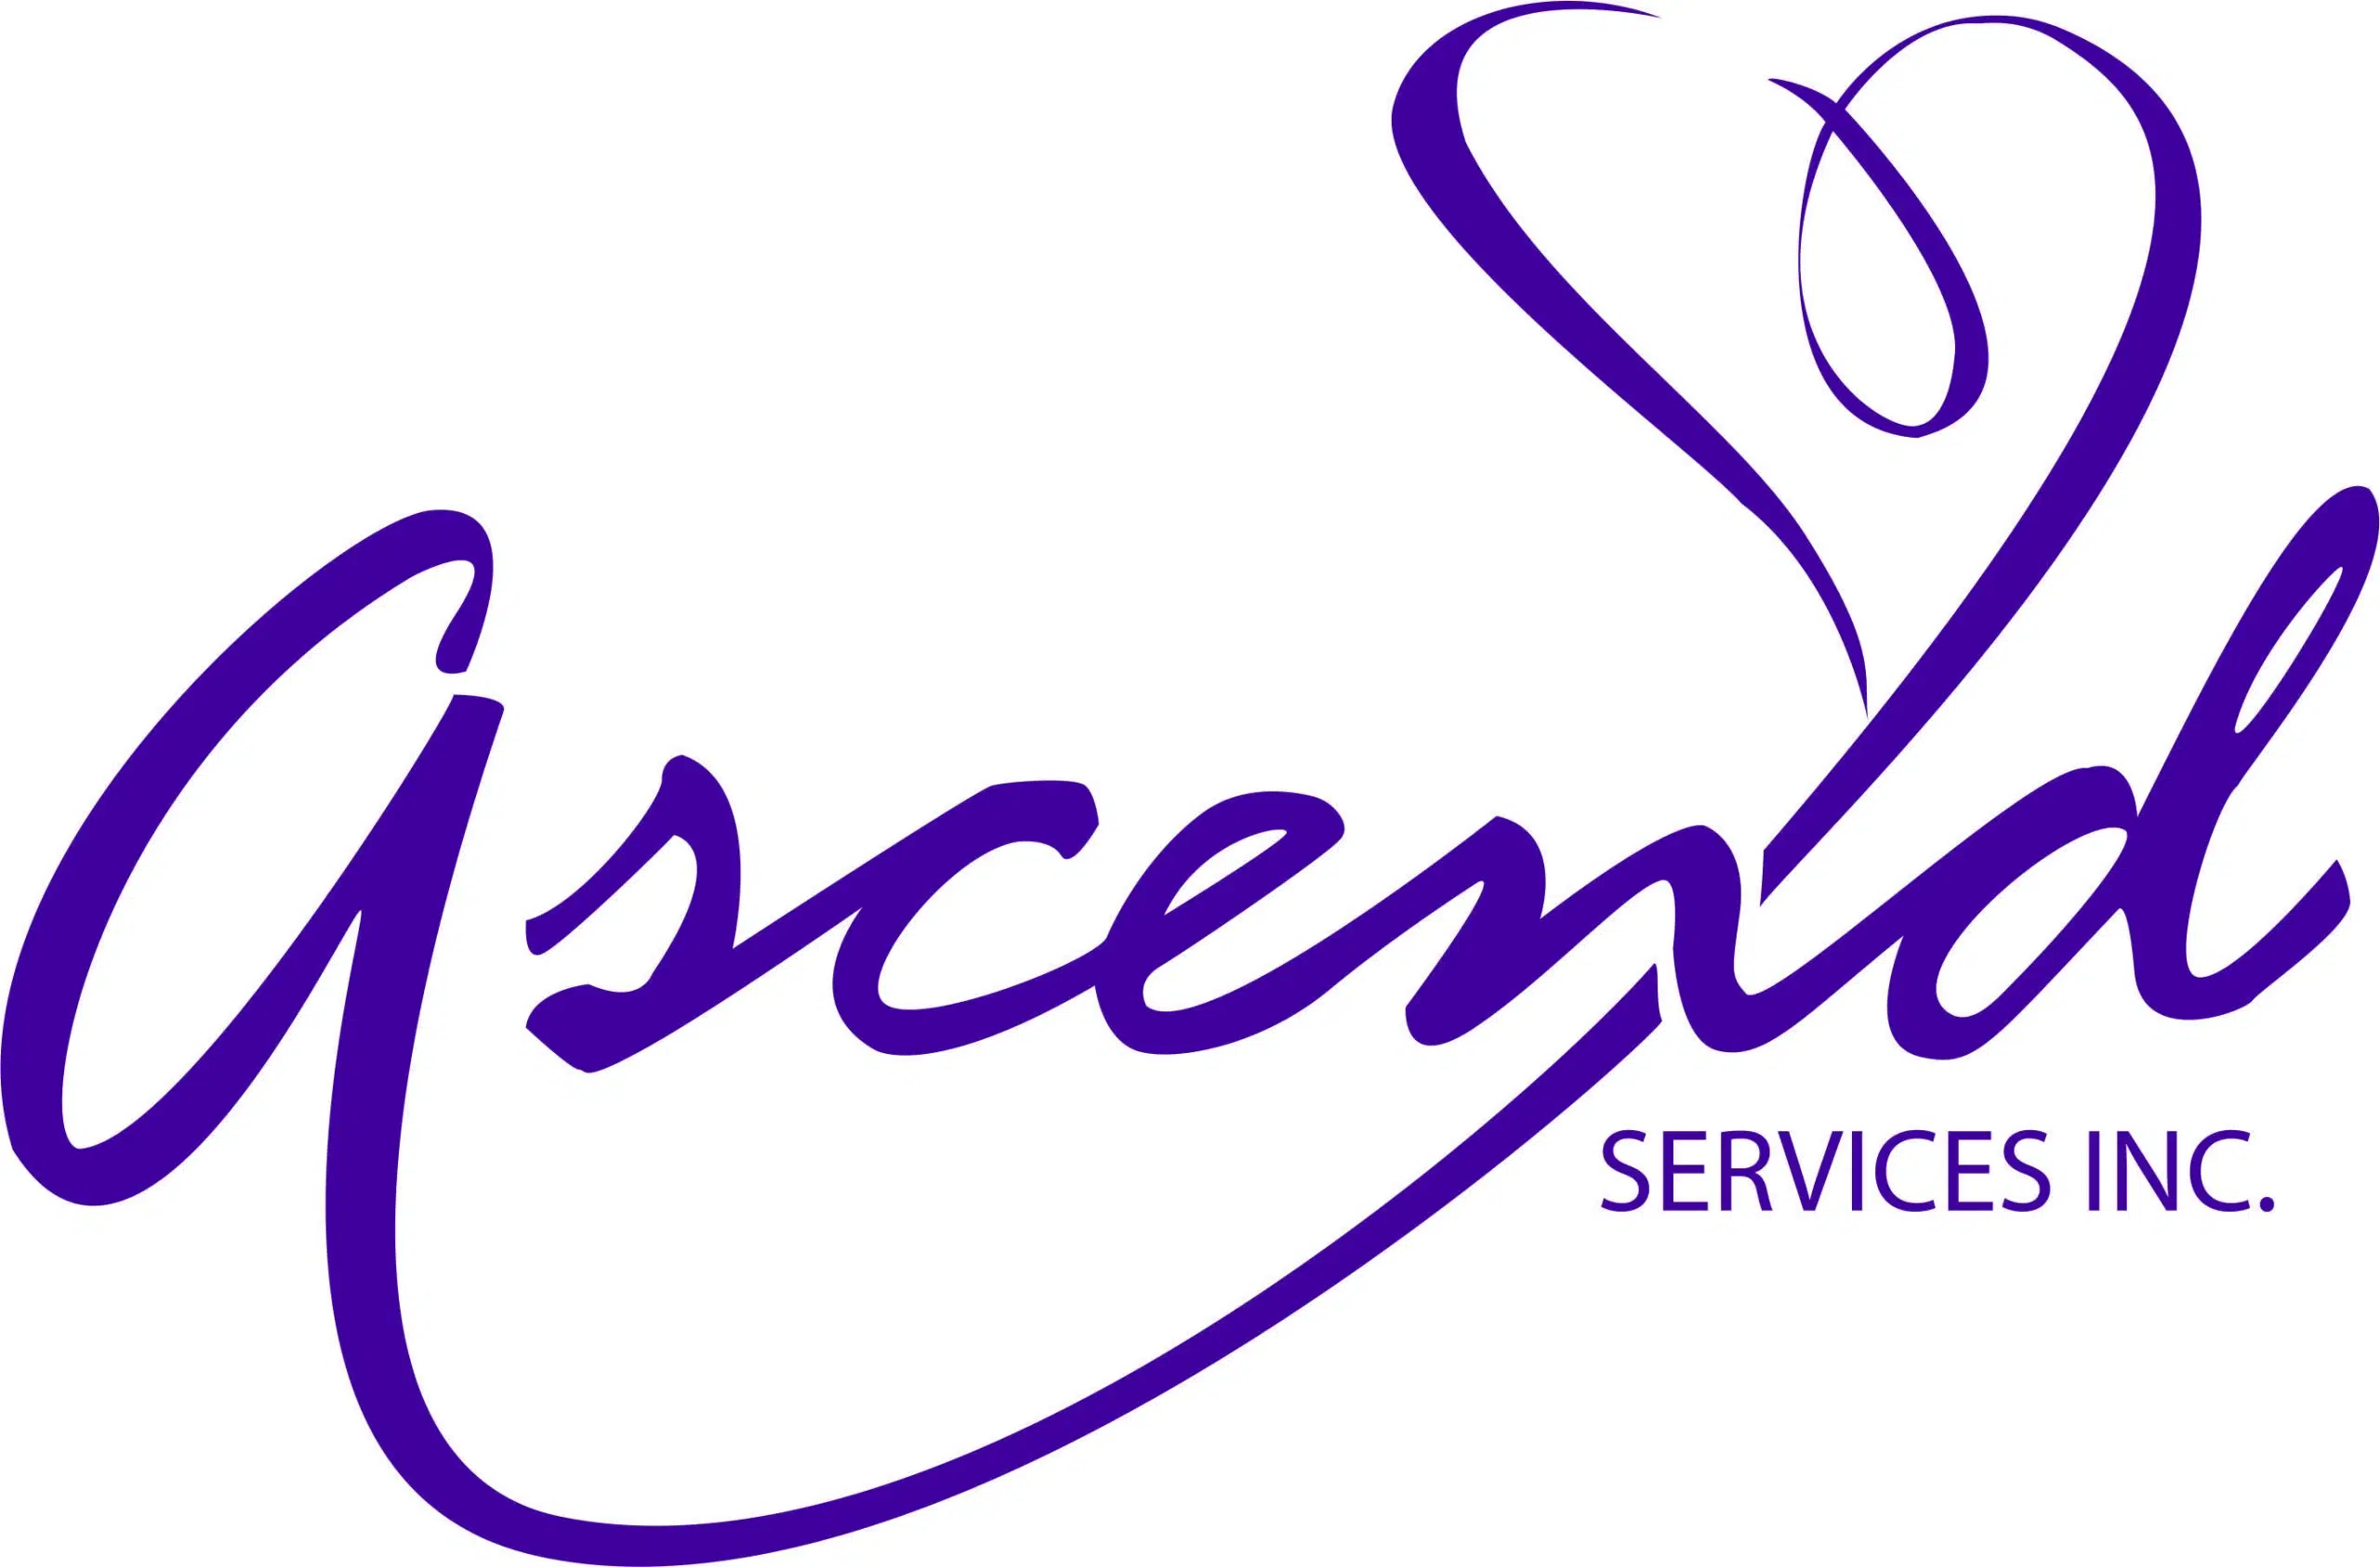 Ascend Services, Inc. Joins Broad Effort to Observe National Disability Employment Awareness Month